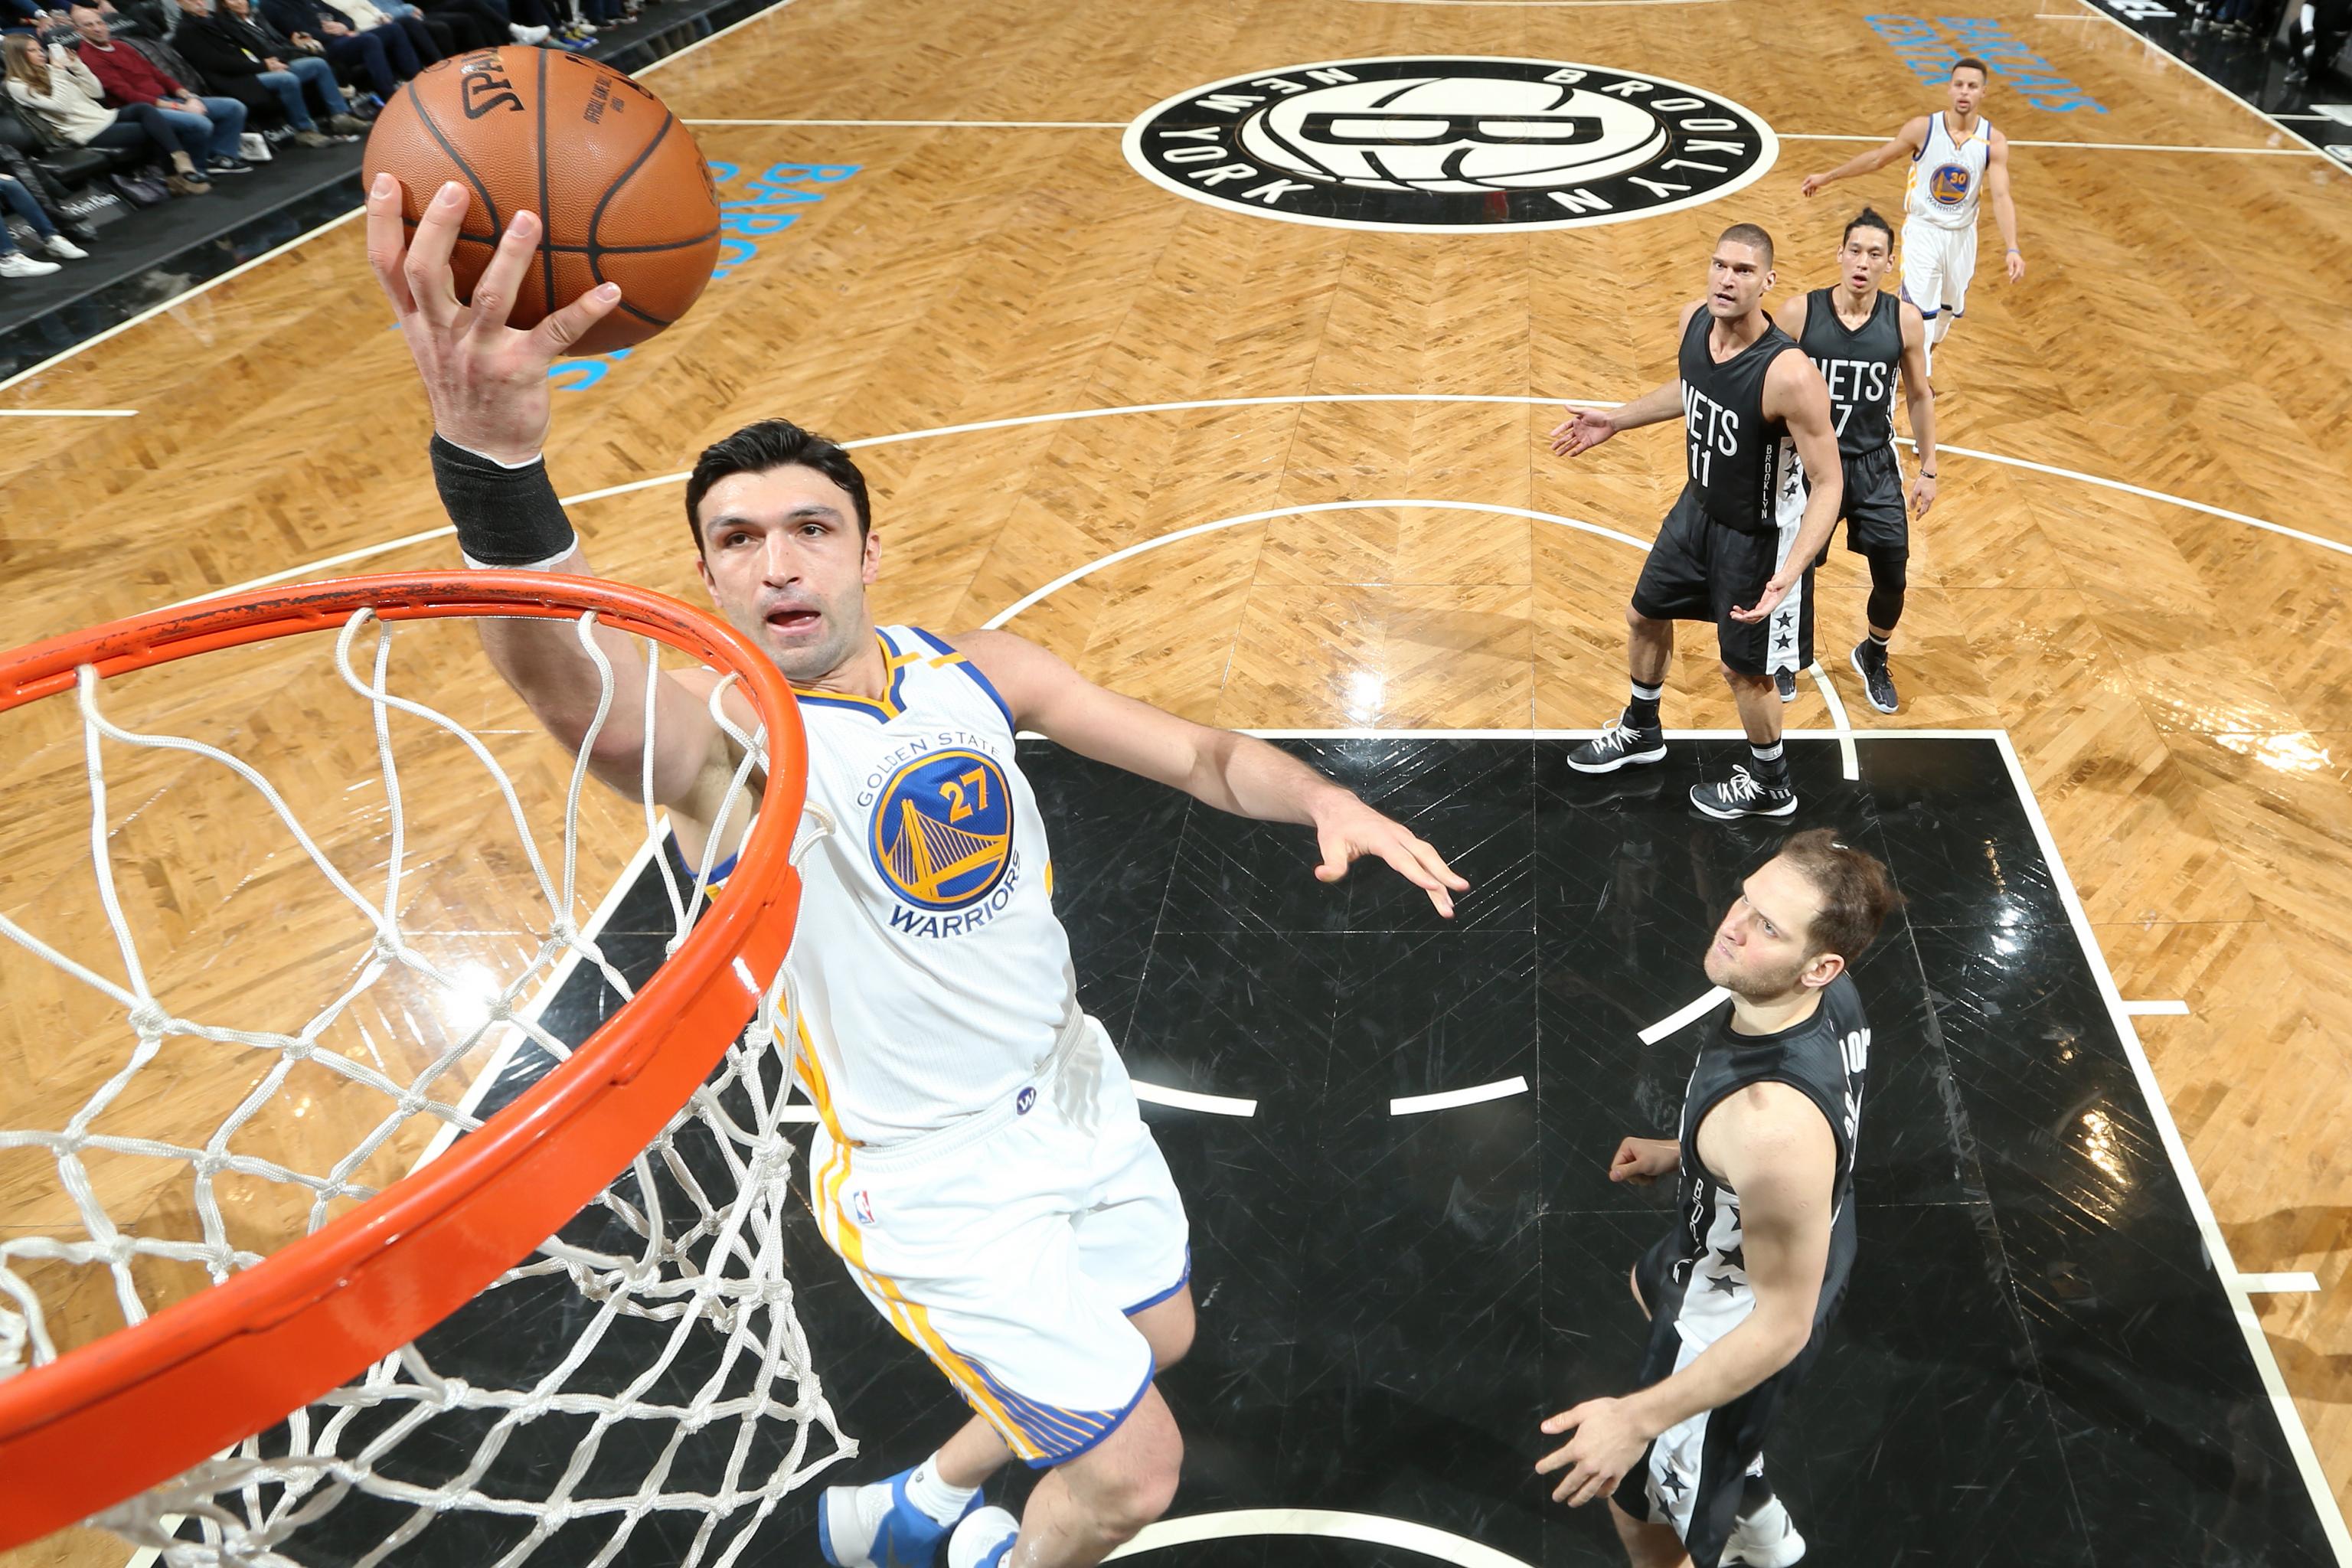 Zaza Pachulia Re-Signs with Warriors on 1-Year, $3.5 Million